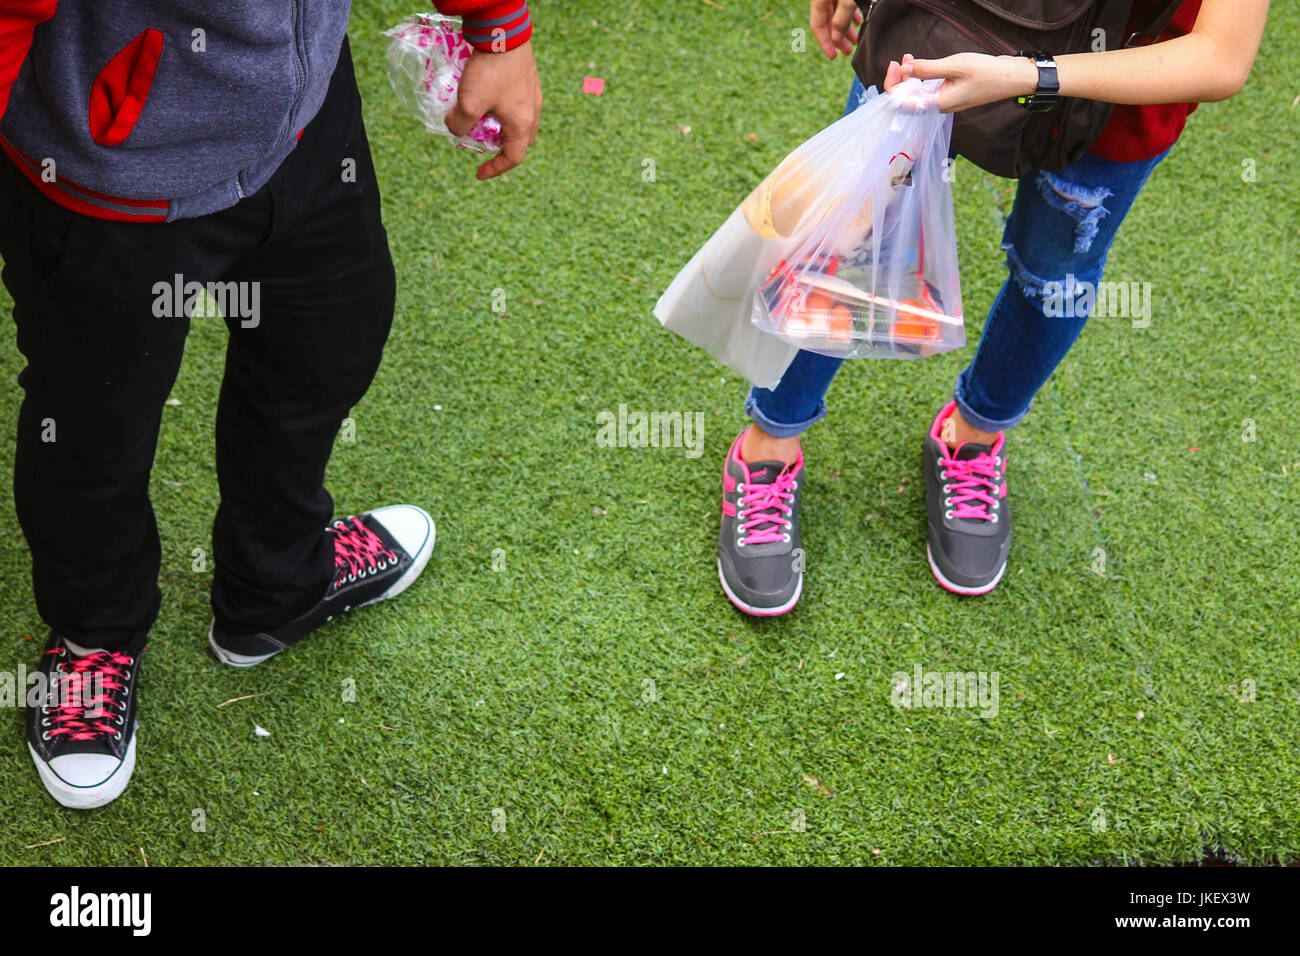 low section shot showing a couple with matching colored shoe laces Stock Photo